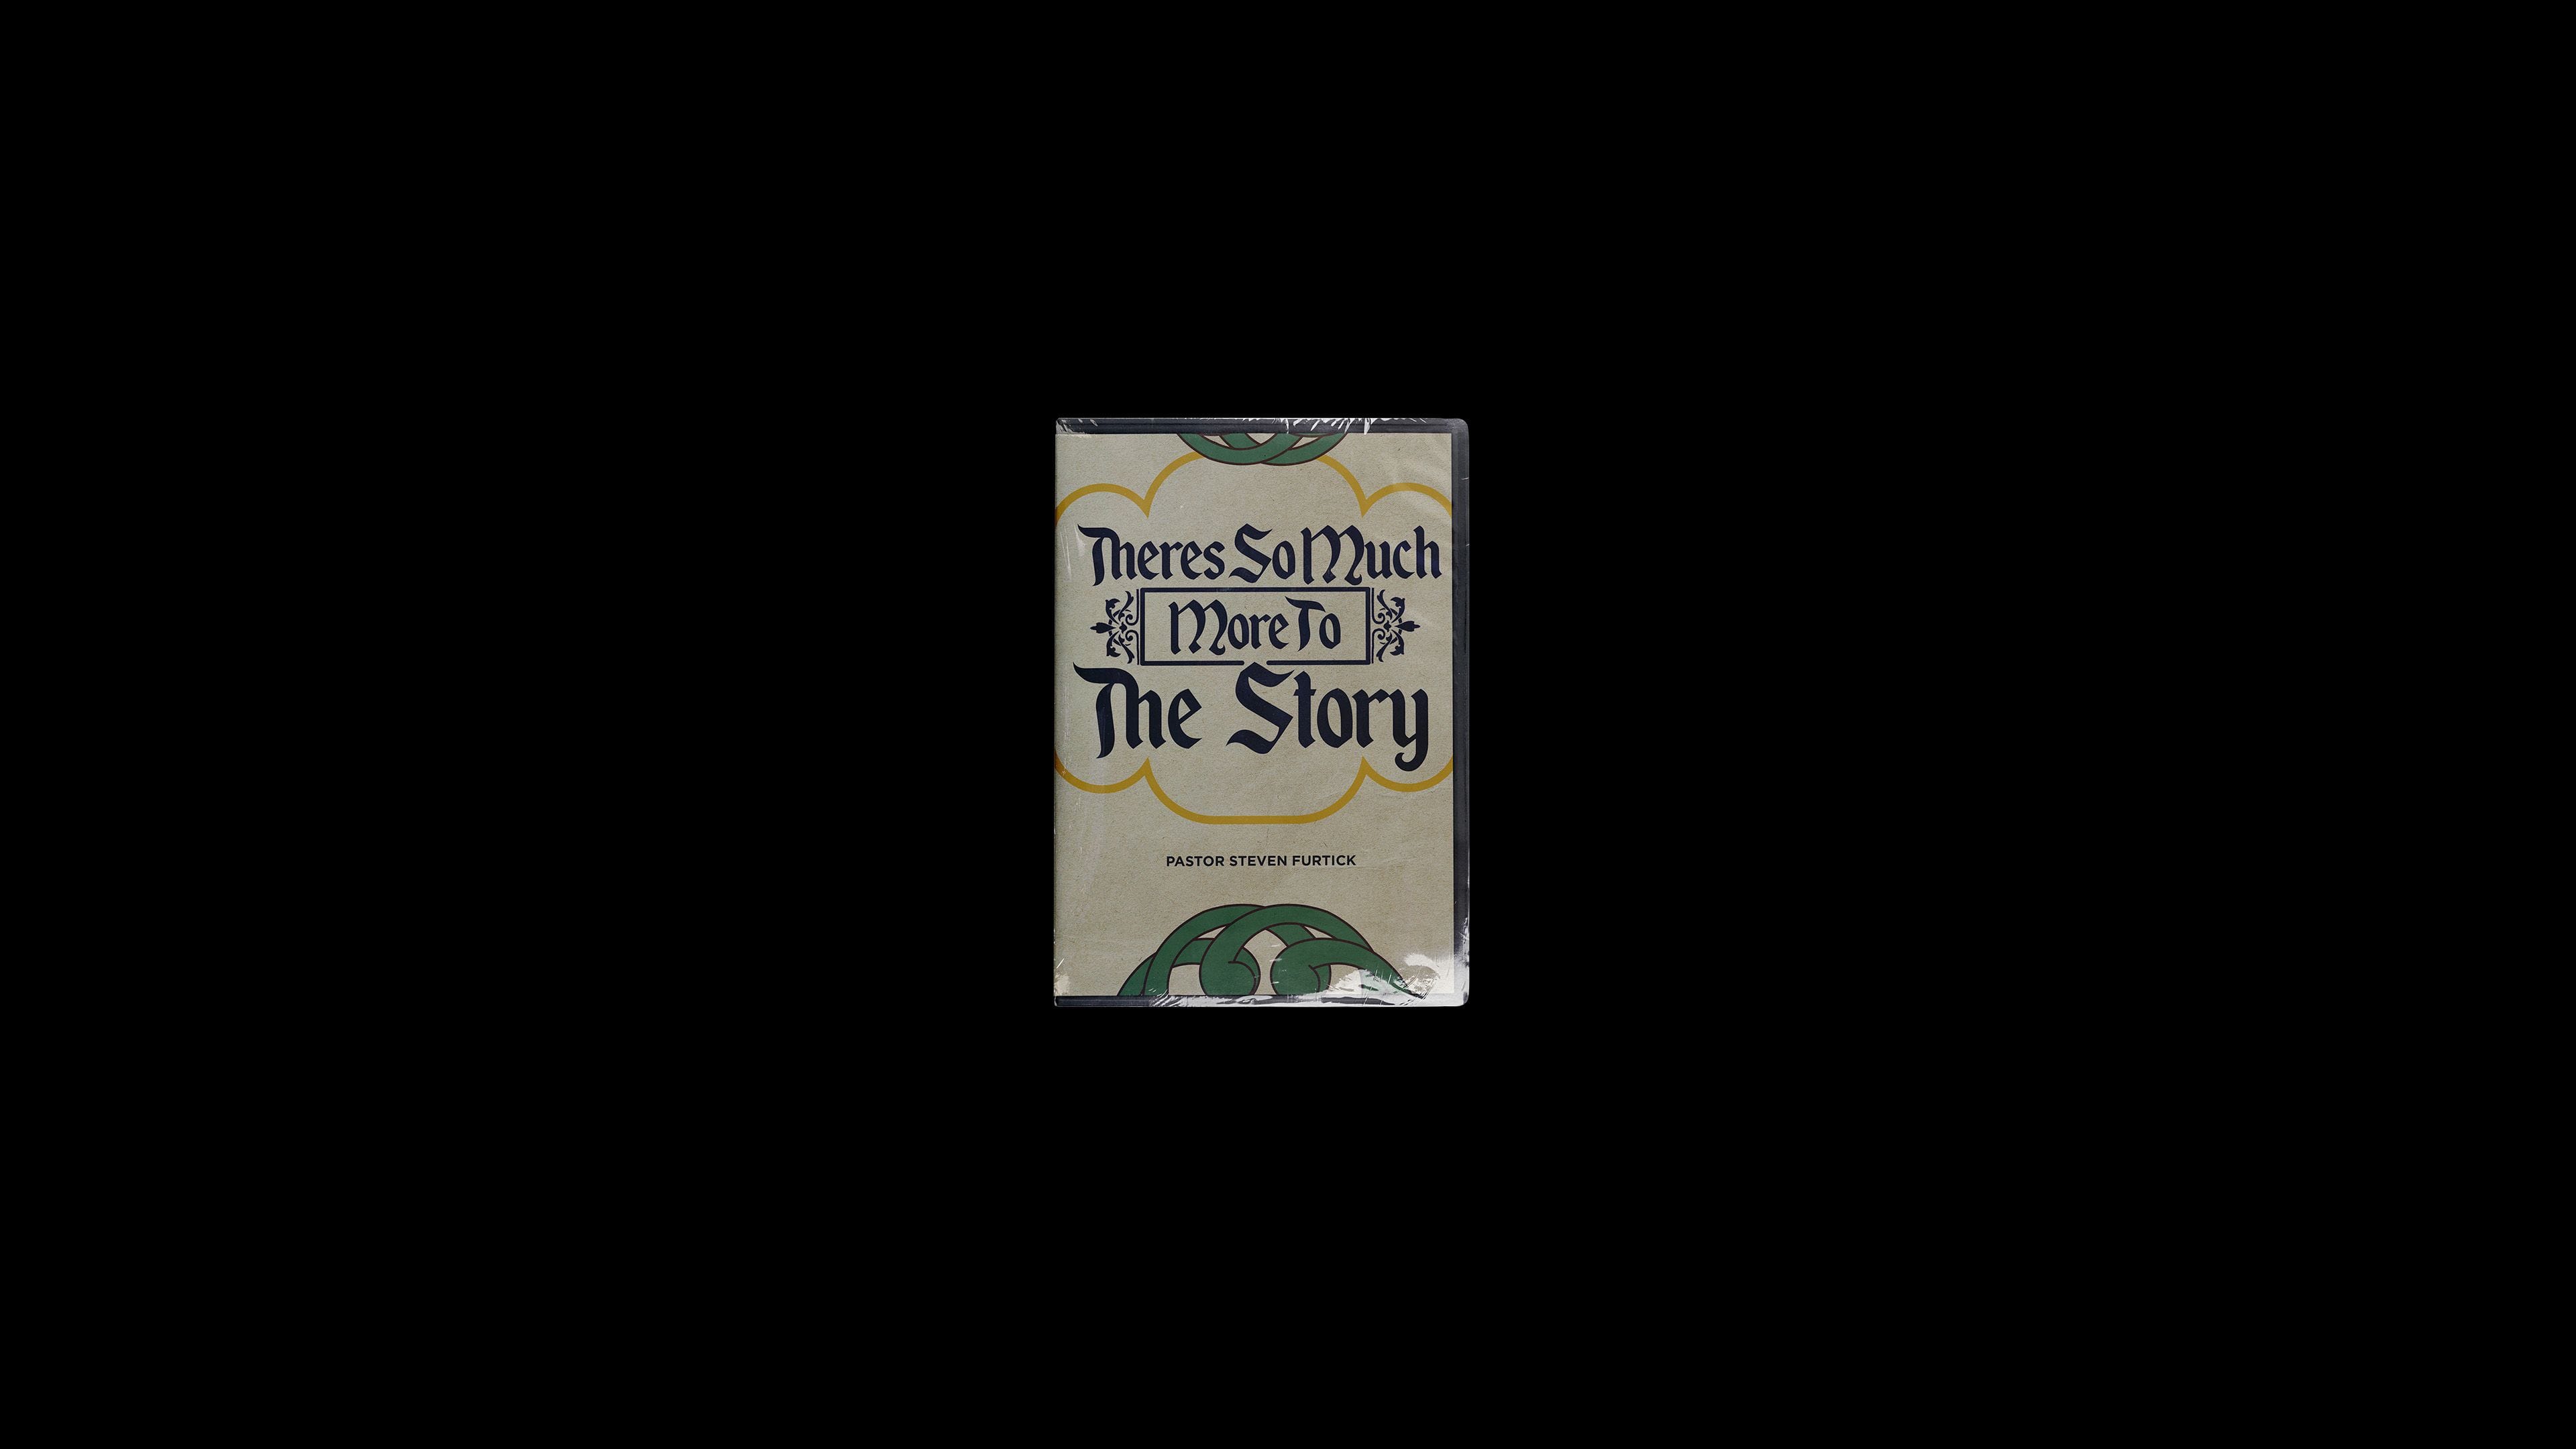 There’s So Much More To The Story DVD Image